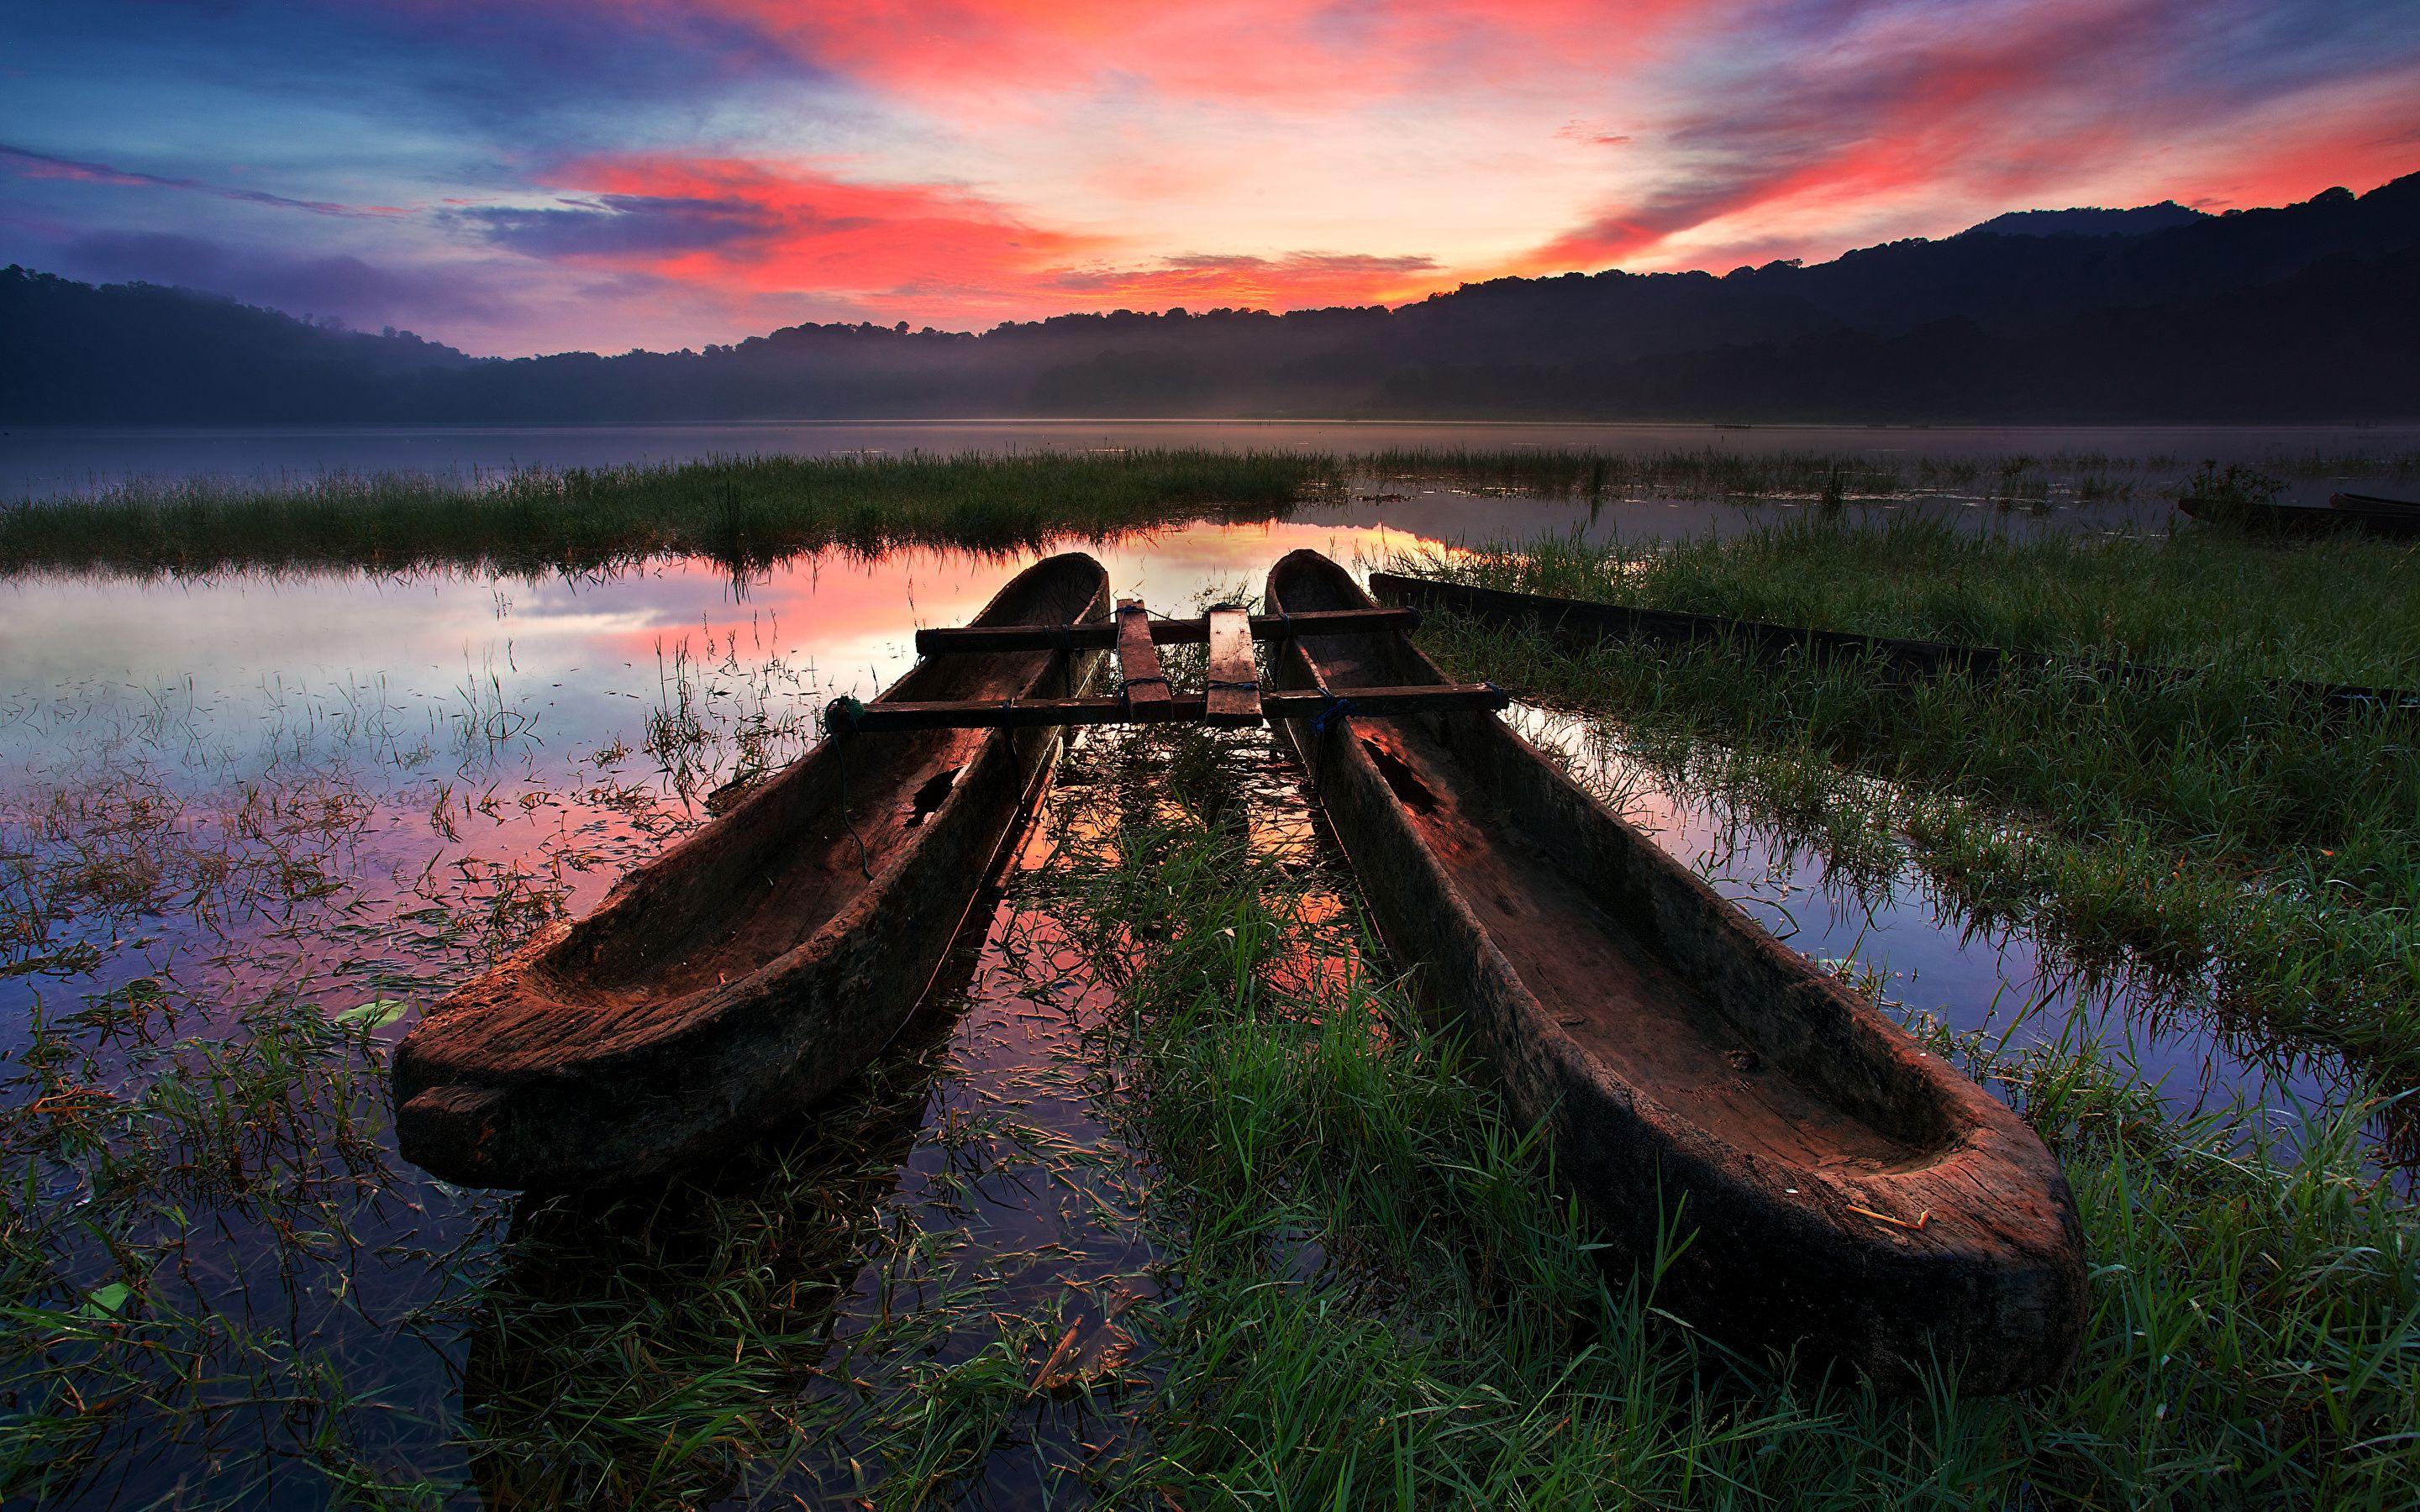  Indonesia  Landscape  Wallpapers  Top Free Indonesia  